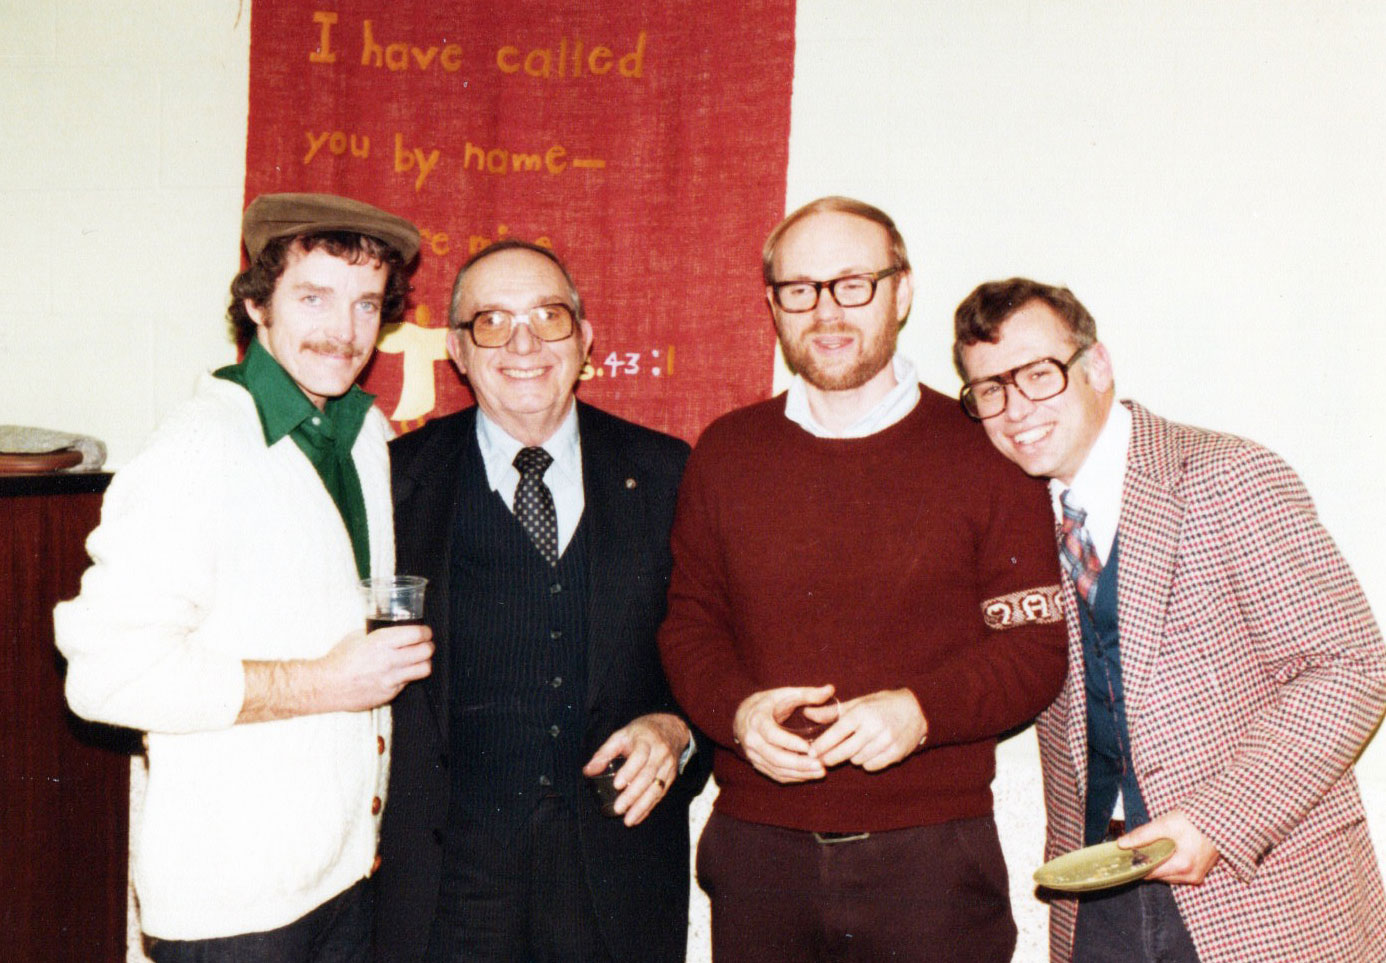 Impactful people to the Herrons during their time at CVC include, from left to right, Michael O’Donnell, Papa Joe Smiddy, Rick Herron and Jim Collie.